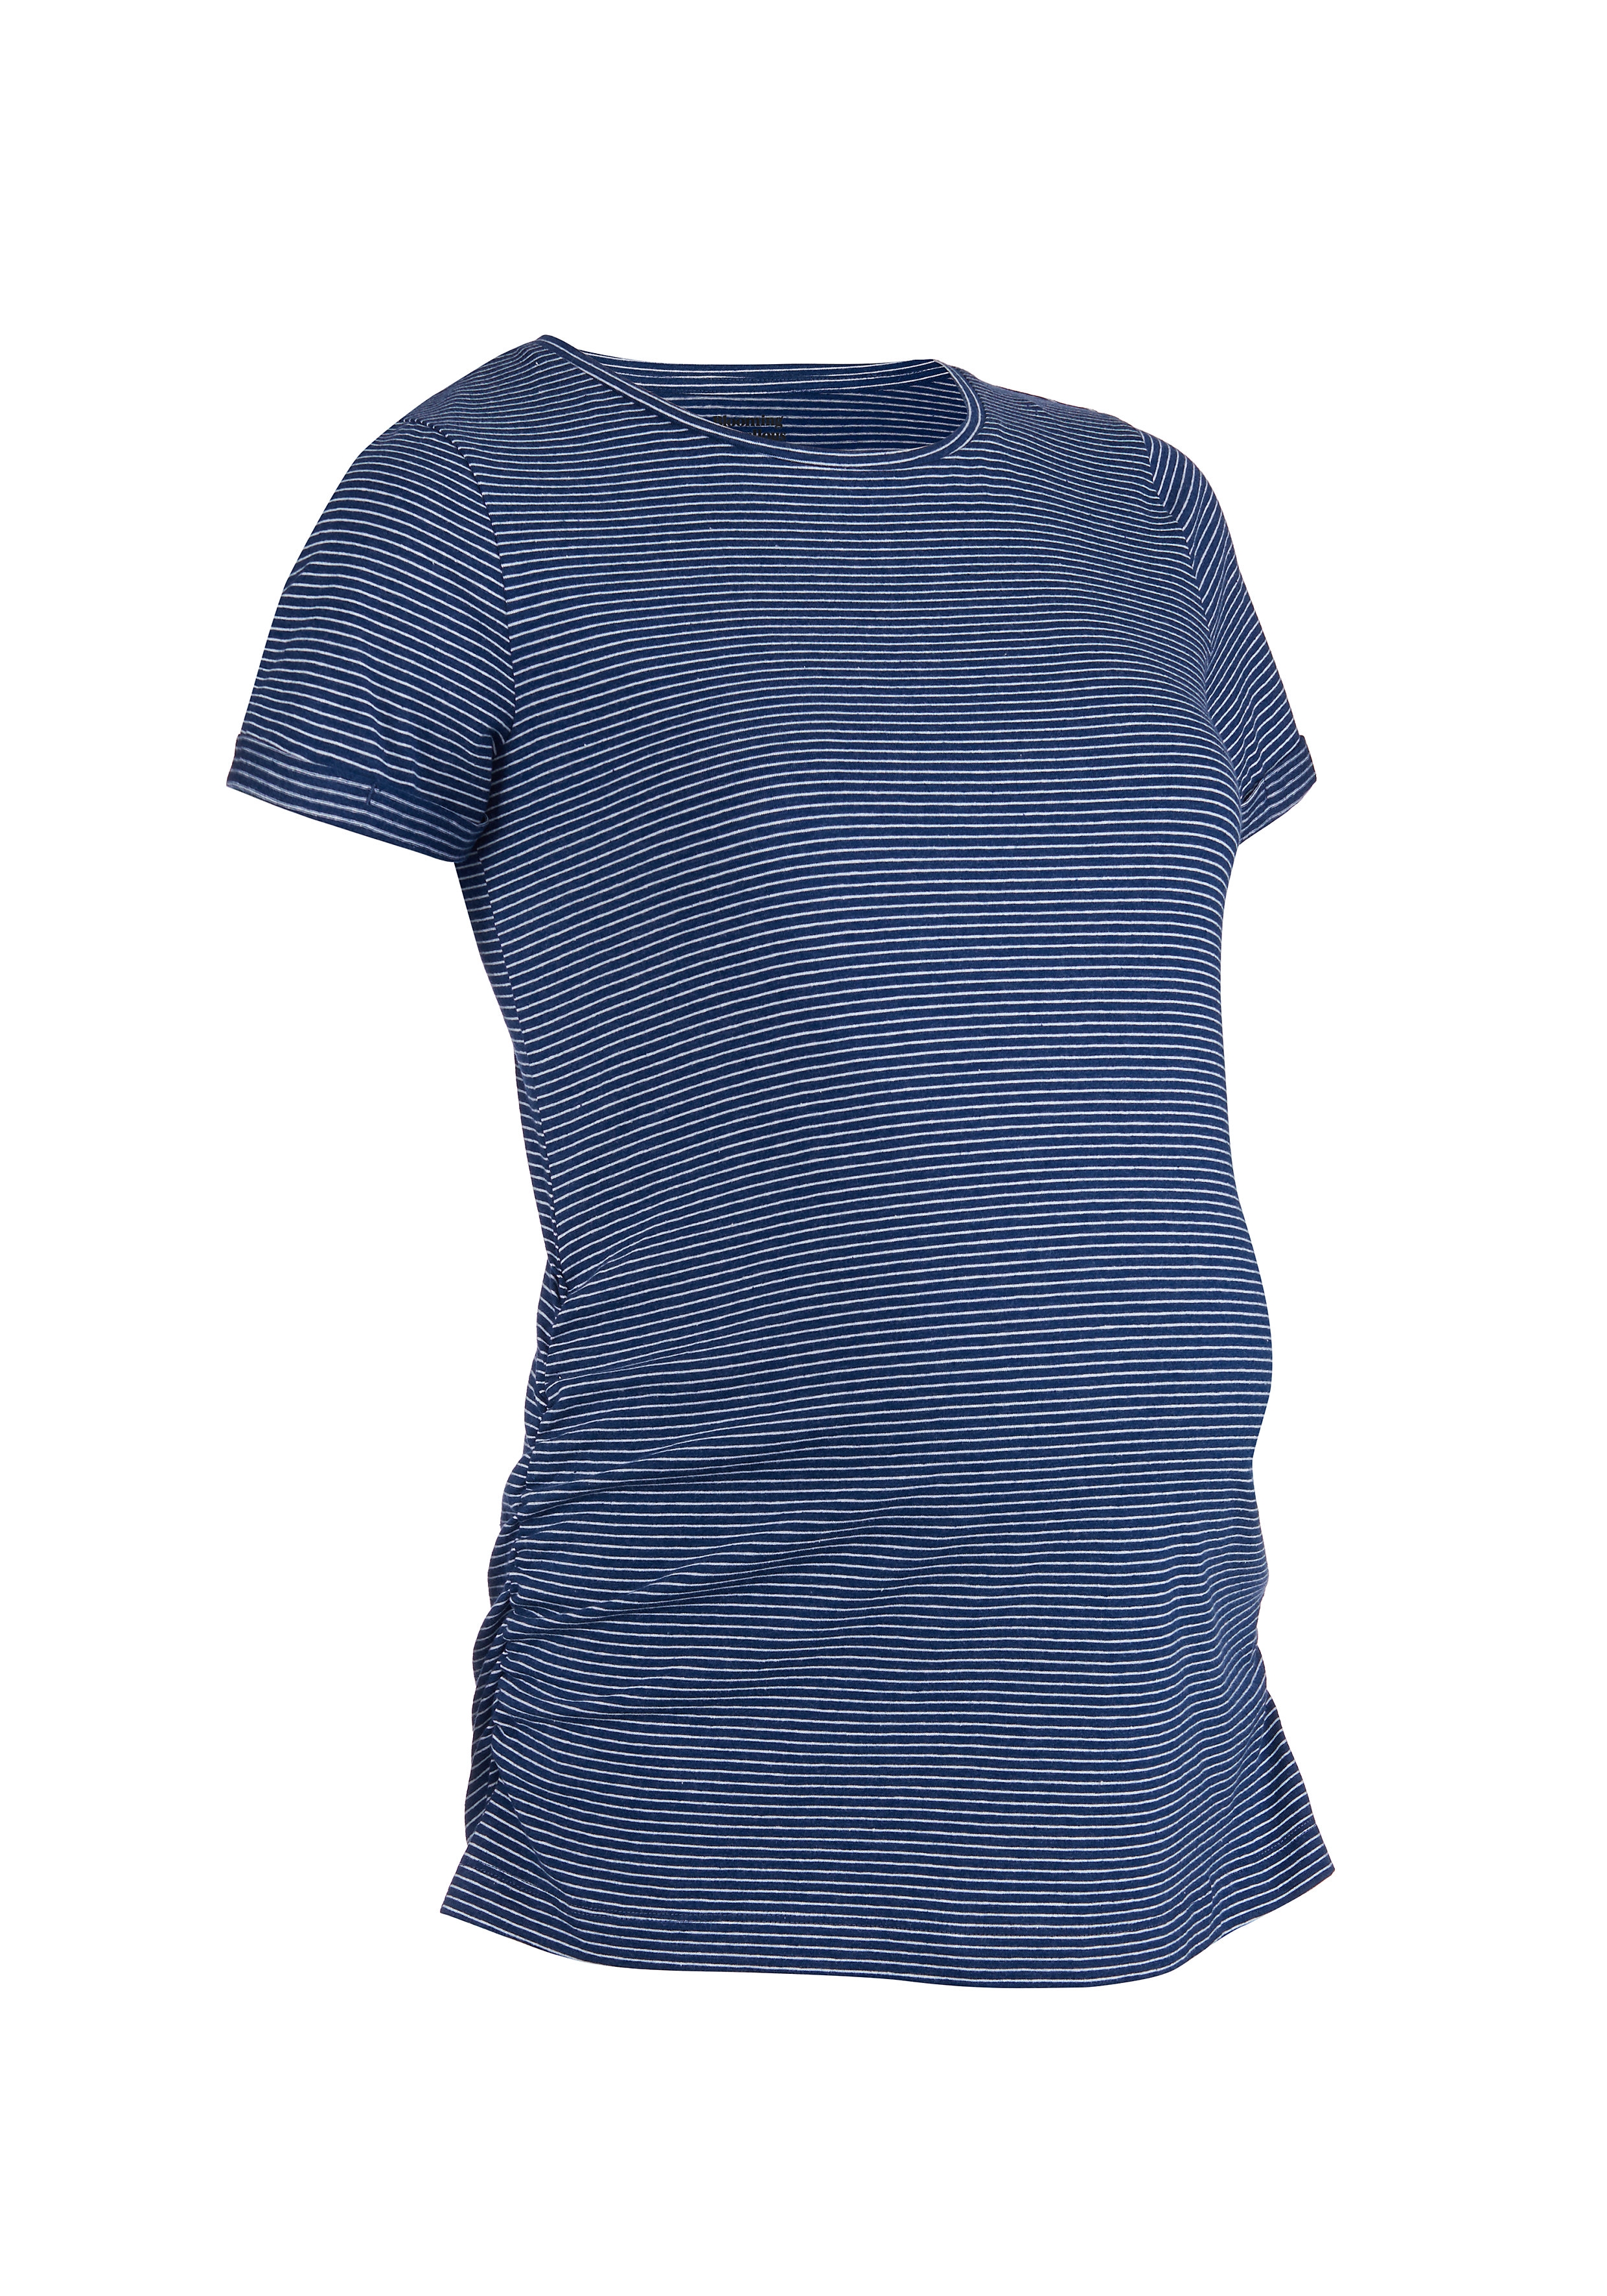 Mothercare | Women Half Sleeves T-Shirt Striped - Blue 0